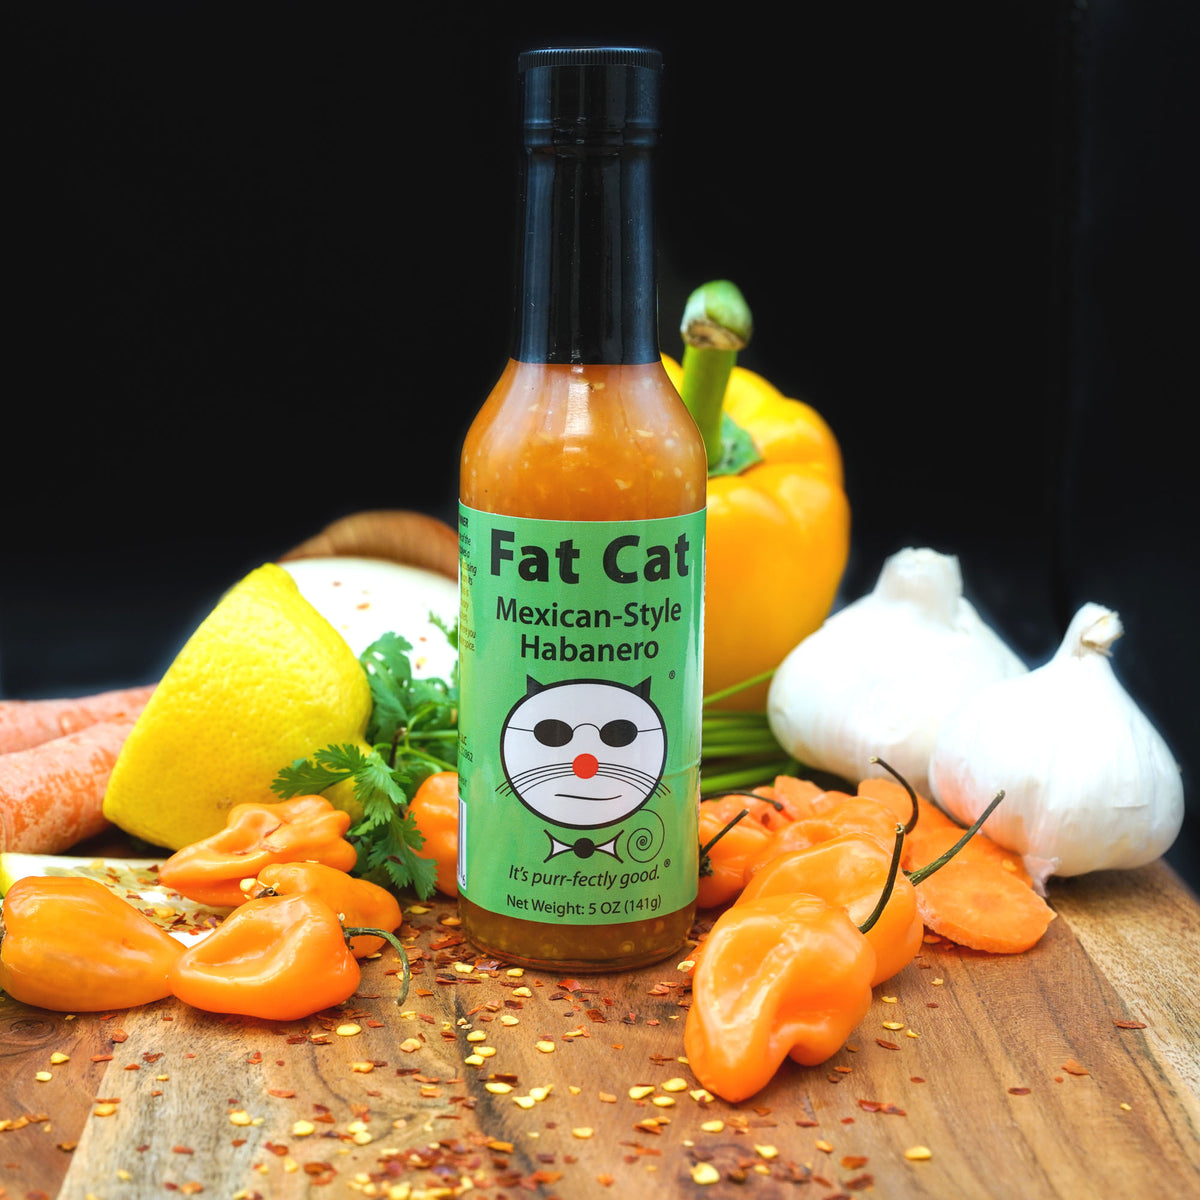 Mexican-Style Habanero Hot Sauce (Wholesale) - Fat Cat Gourmet Hot Sauce & Specialty Condiments